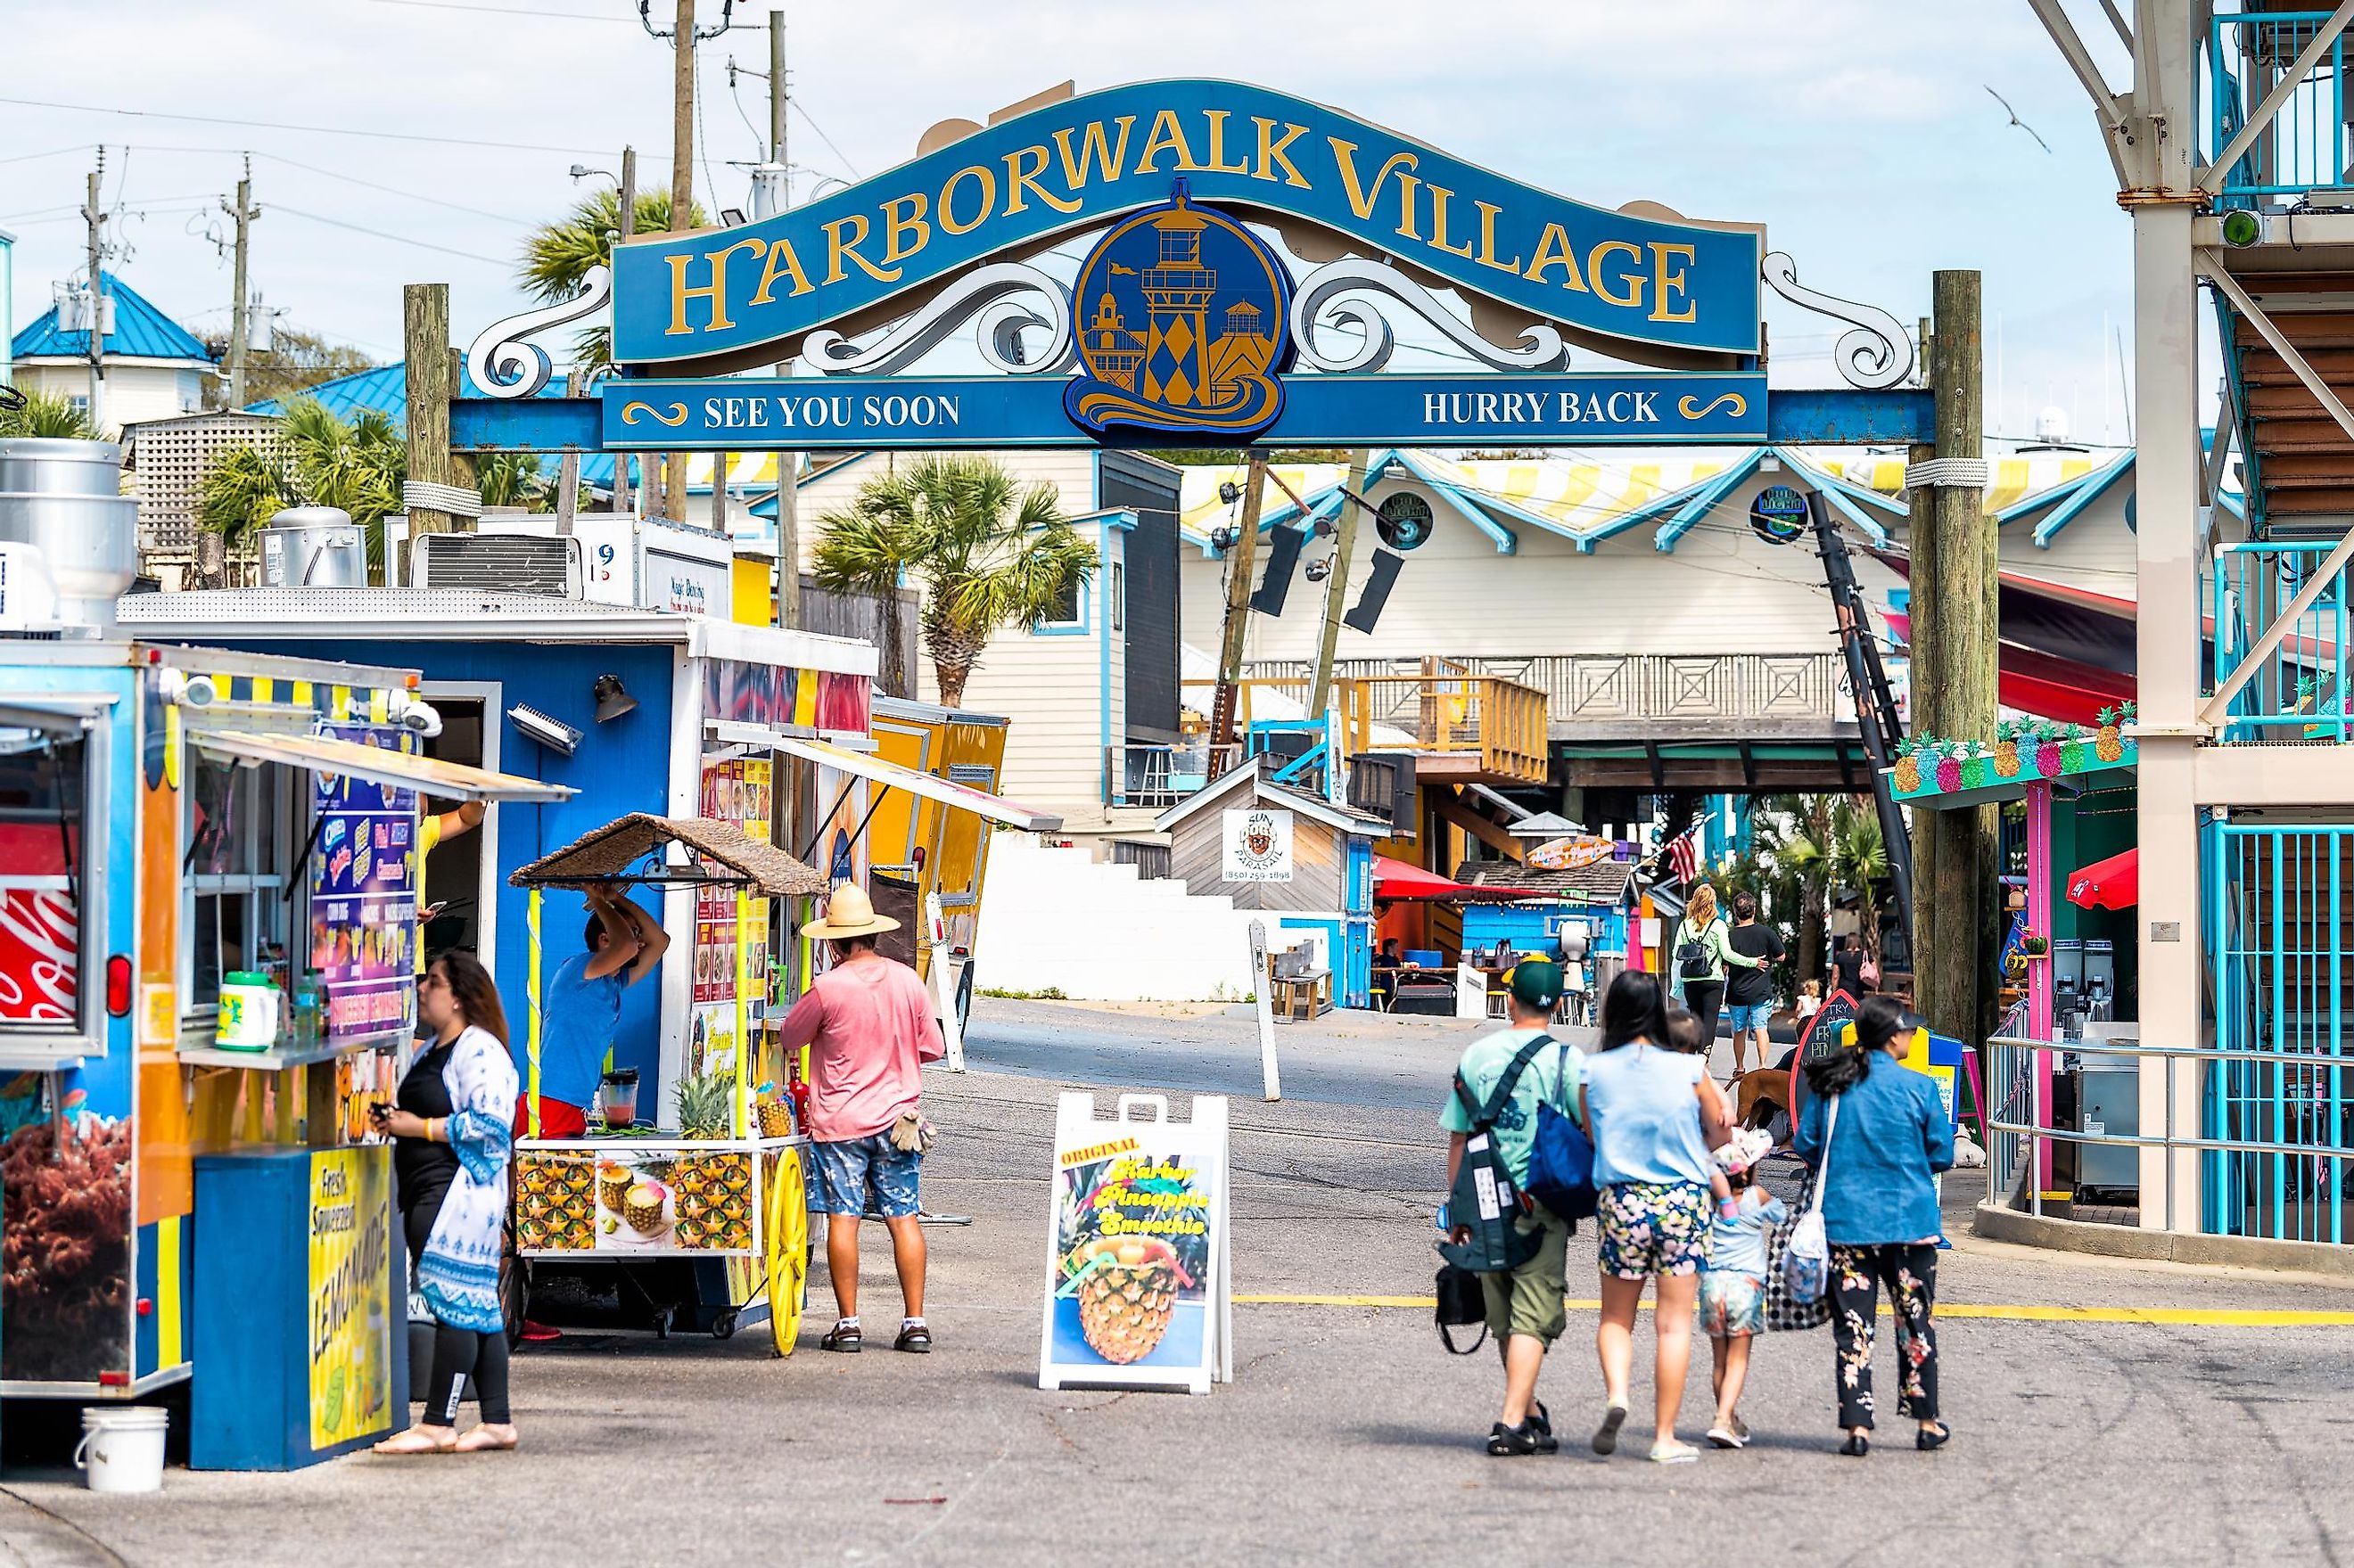 Destin, USA - April 24, 2018: Sign for Harborwalk Village in Emerald Grande Coast in Florida Panhandle with people walking and shopping,